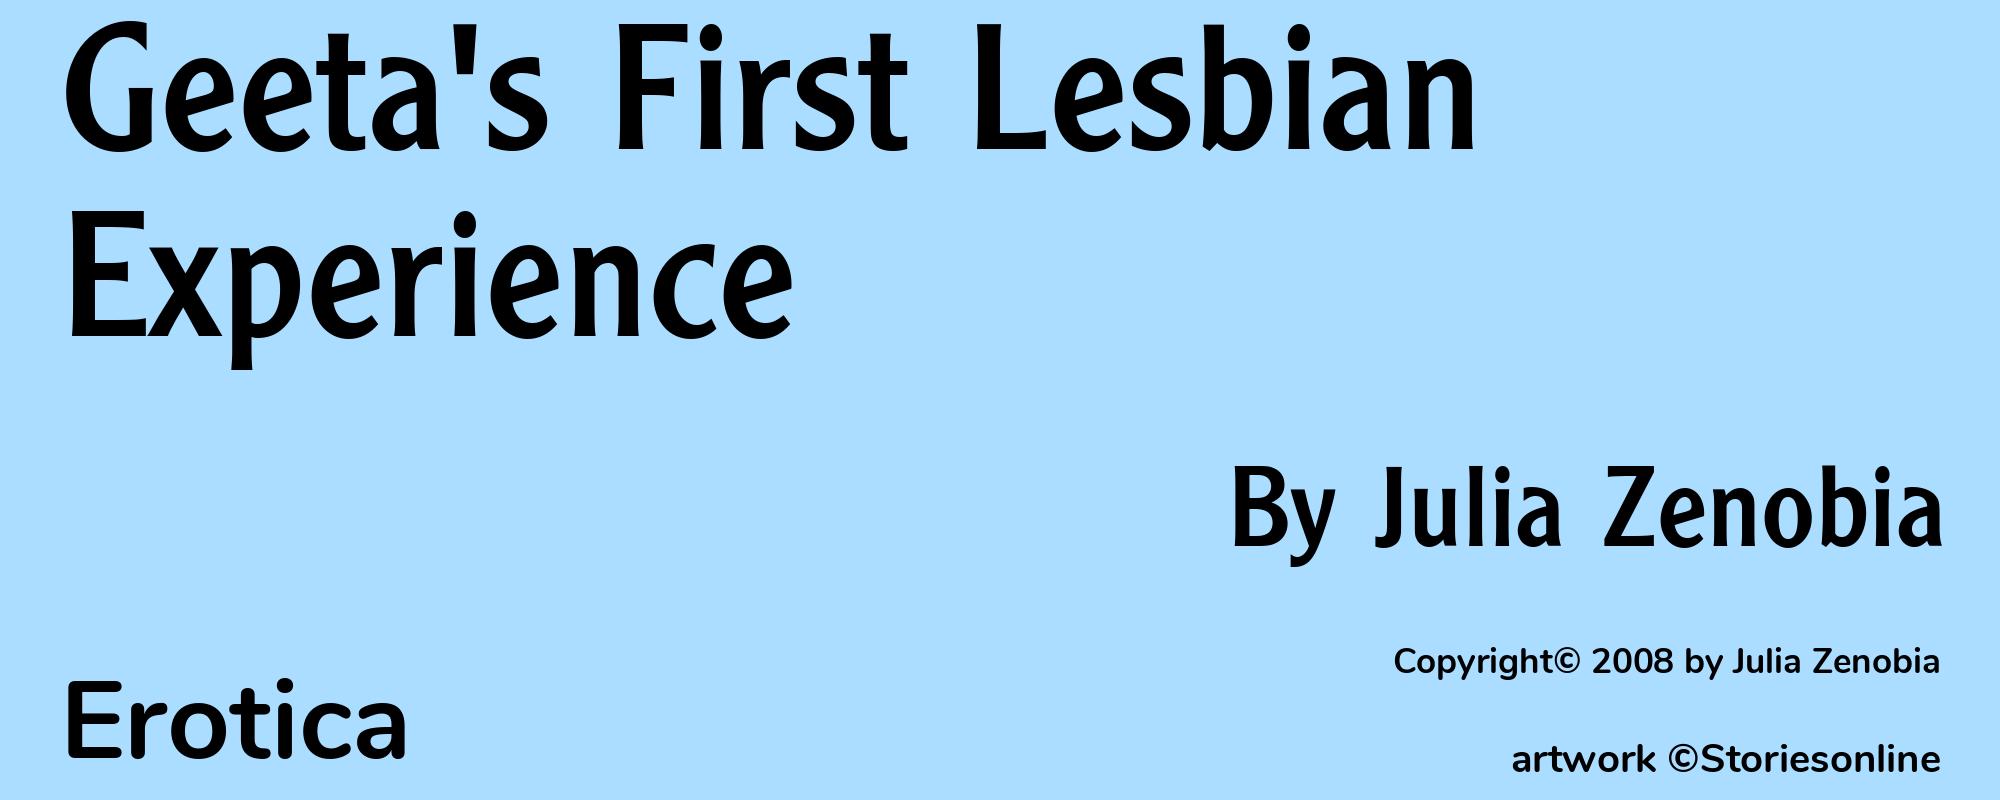 Geeta's First Lesbian Experience - Cover